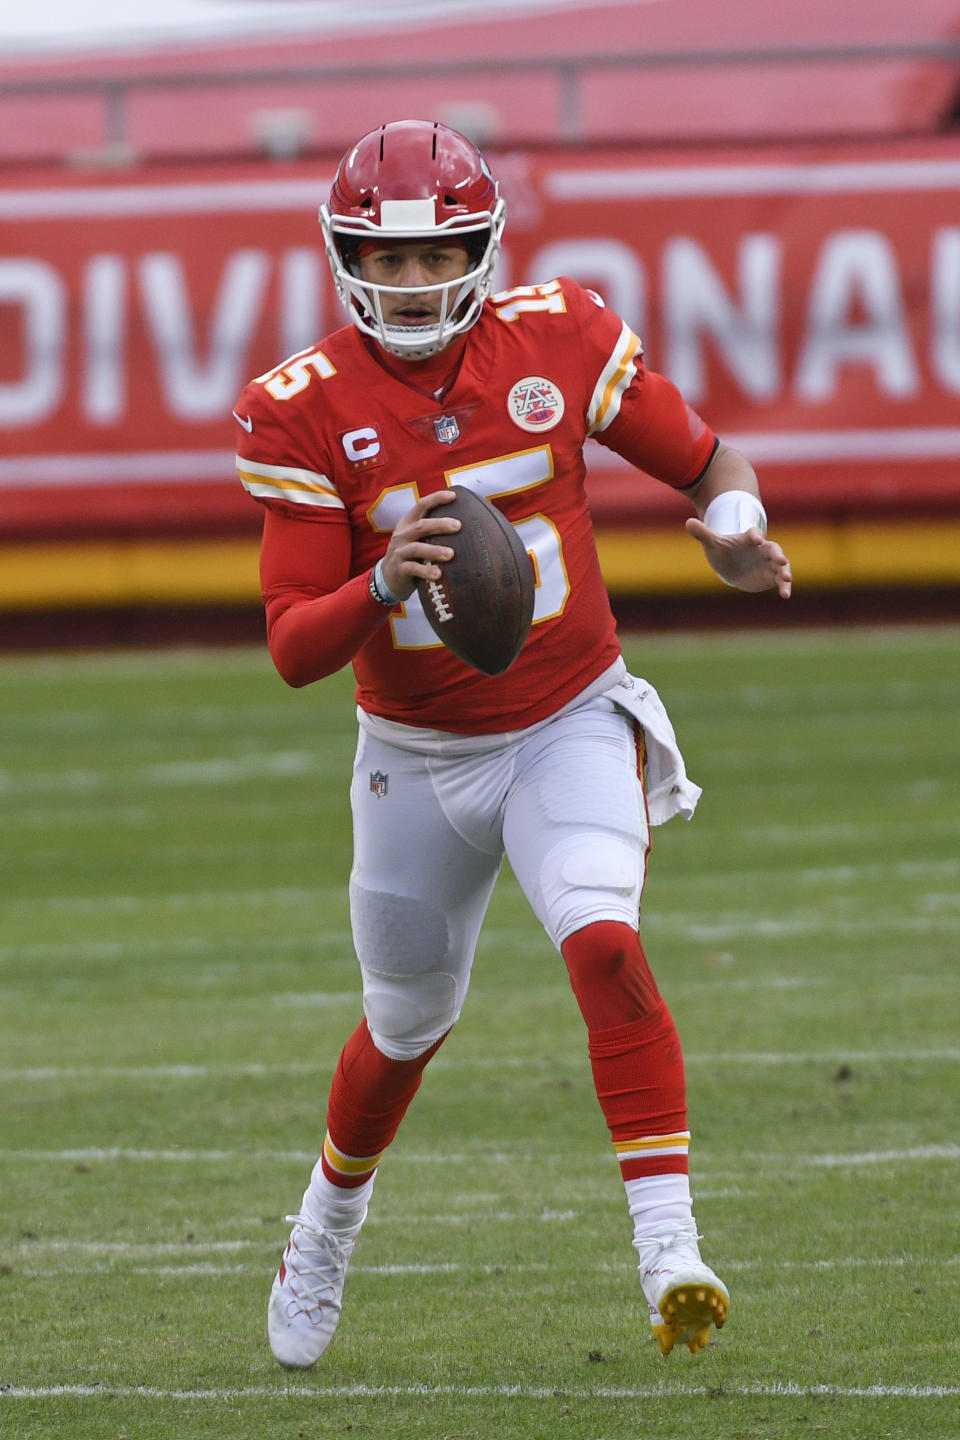 Kansas City Chiefs quarterback Patrick Mahomes scrambles up field during the first half of an NFL divisional round football game against the Cleveland Browns, Sunday, Jan. 17, 2021, in Kansas City. (AP Photo/Reed Hoffmann)